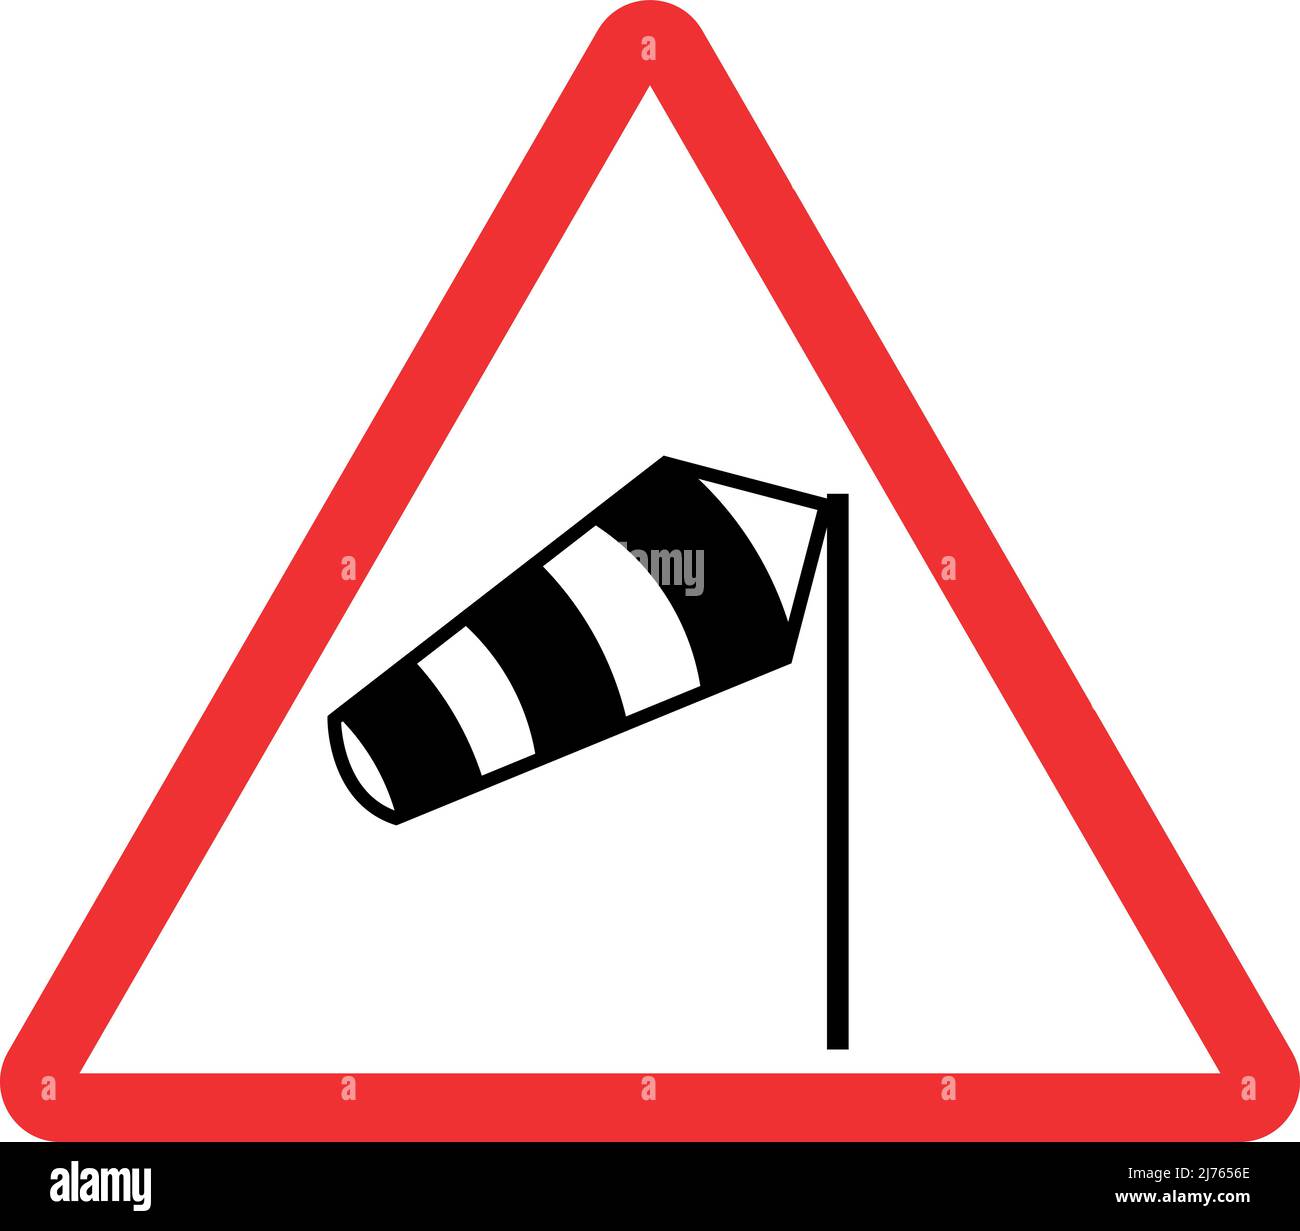 Crosswind from right warning sign. Red triangle background. Road safety signs and symbols. Stock Vector